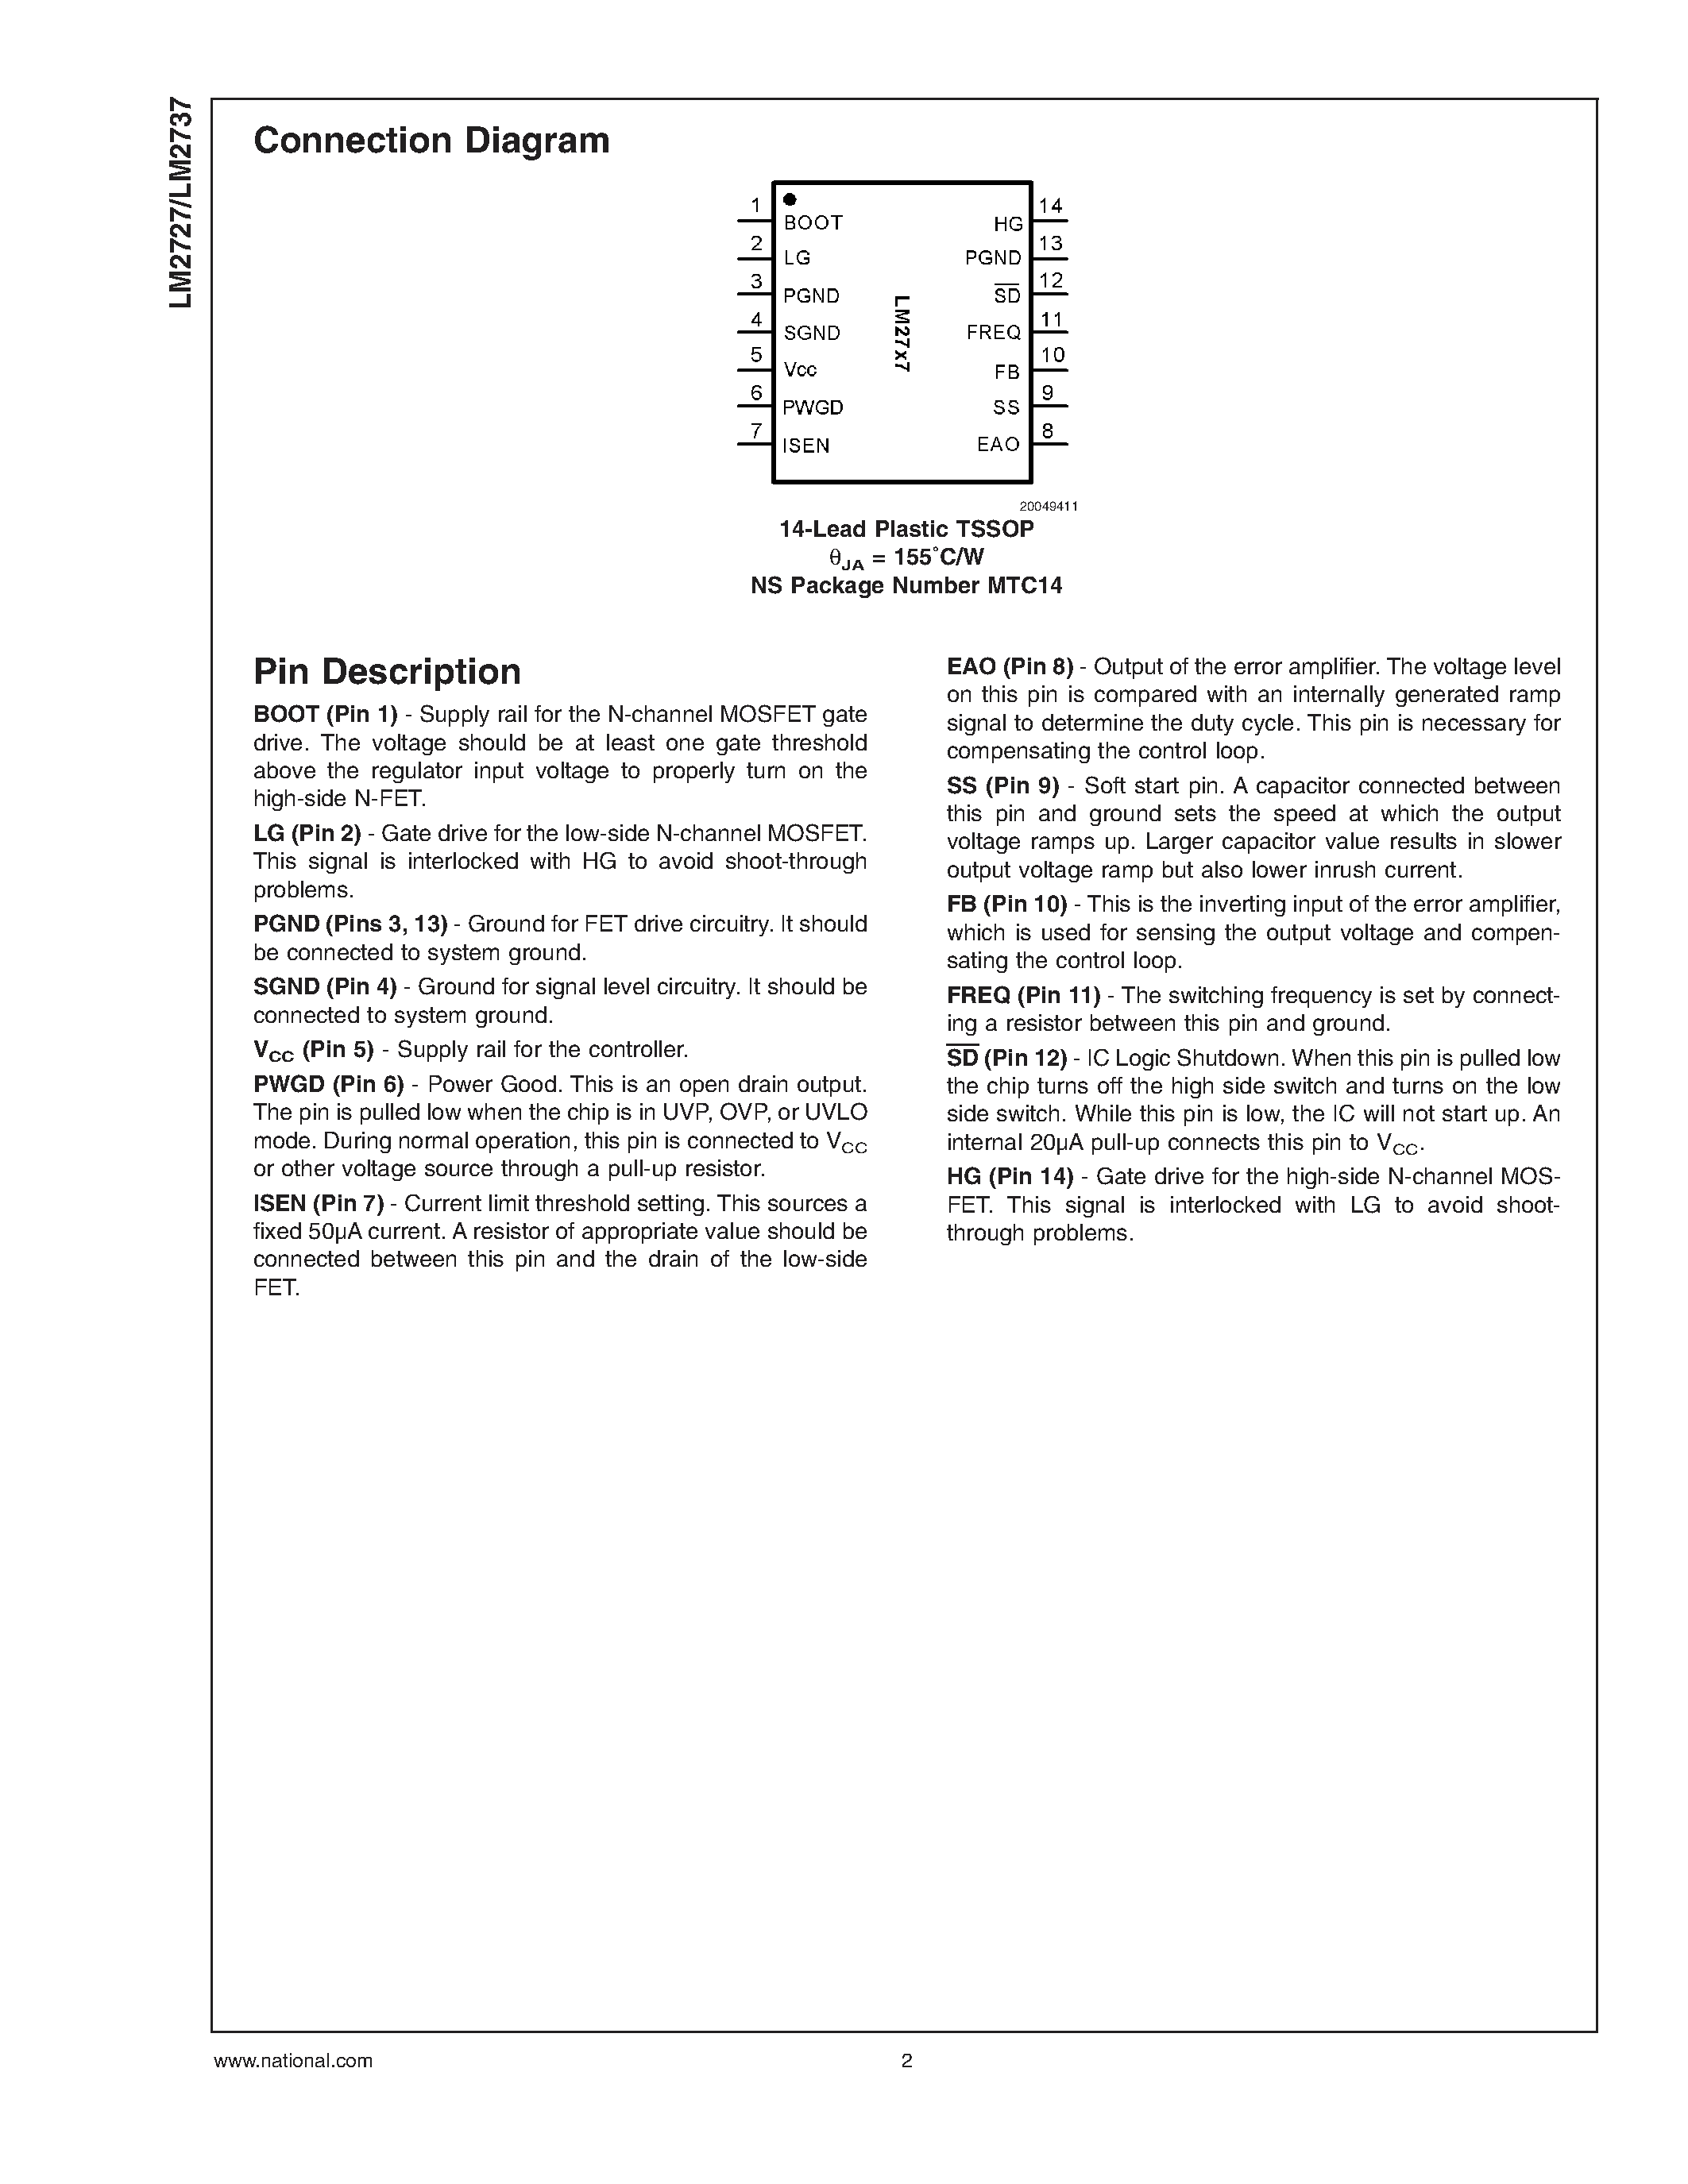 Datasheet BAT-54 - N-Channel FET Synchronous Buck Regulator Controller for Low Output Voltages page 2